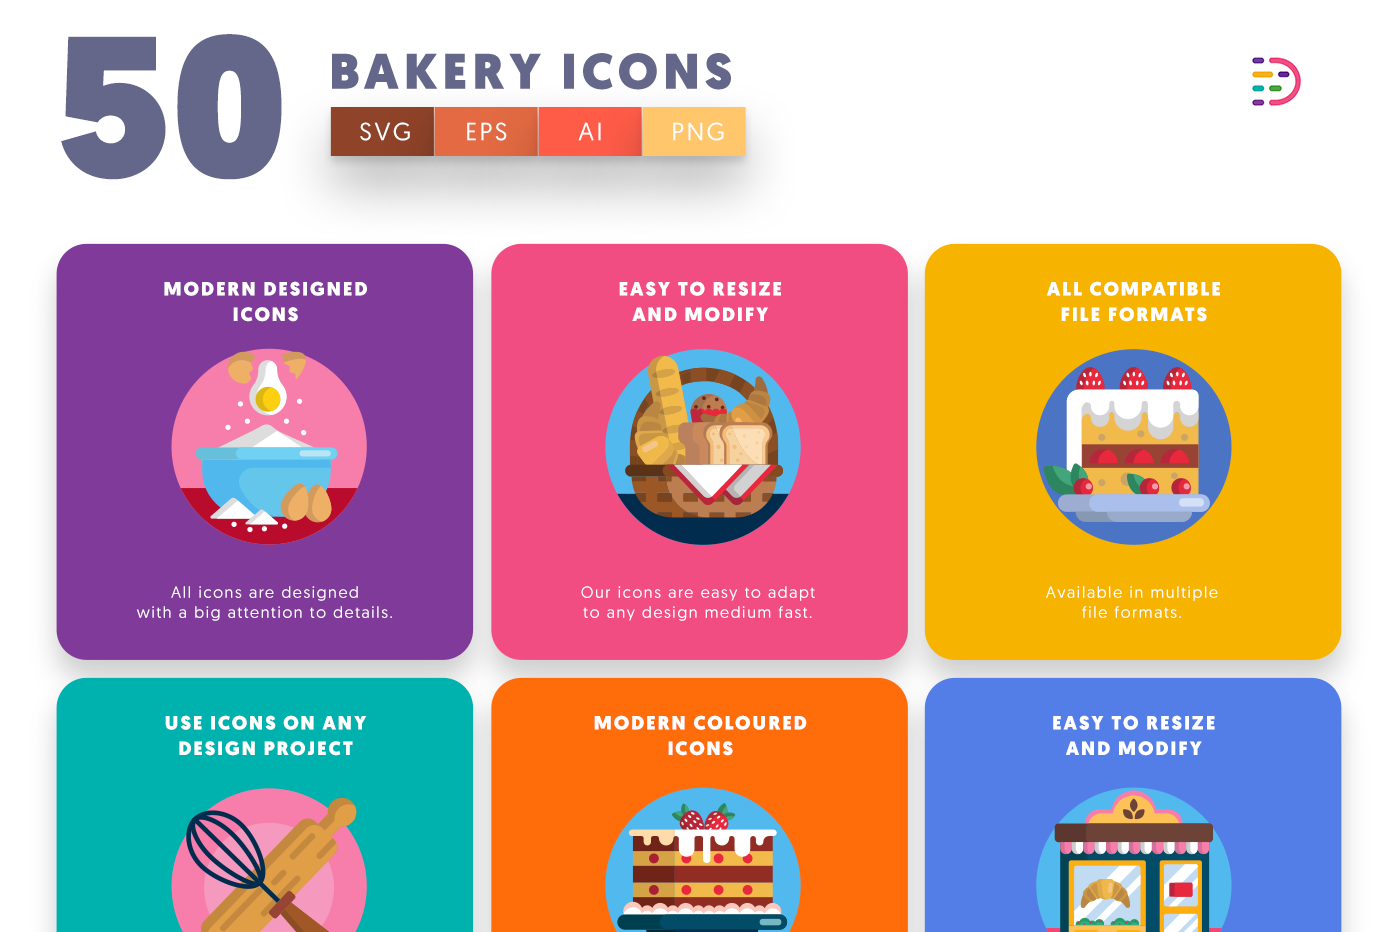 Bakery Icons with colored backgrounds